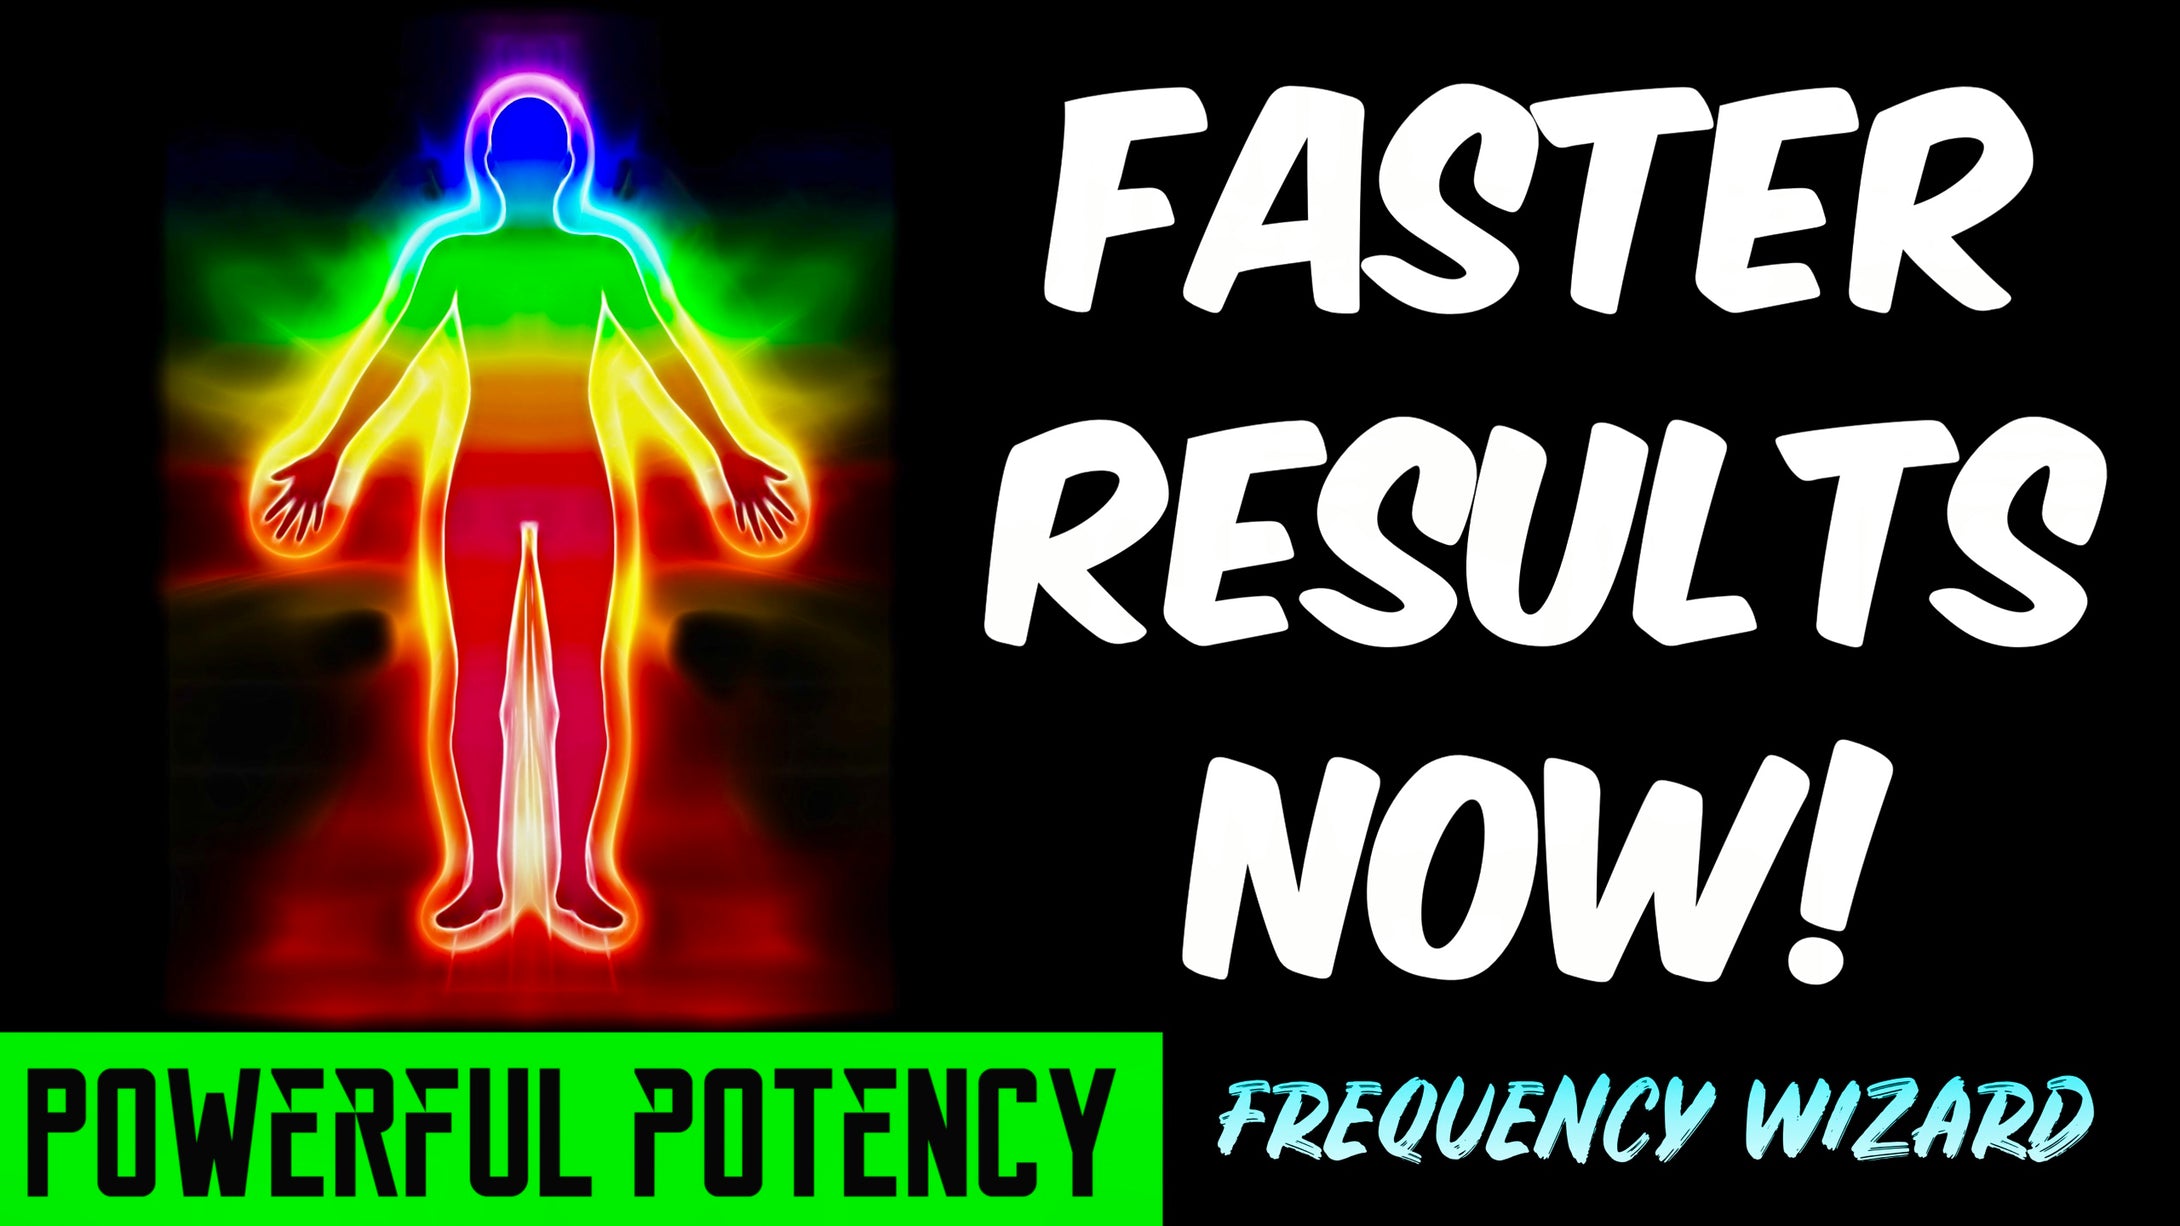 REMOVE ALL AURIC BLOCKAGES - GET FASTER RESULTS! ATTRACT WEALTH, LOVE, POSITIVE VIBES! FREQUENCY WIZARD